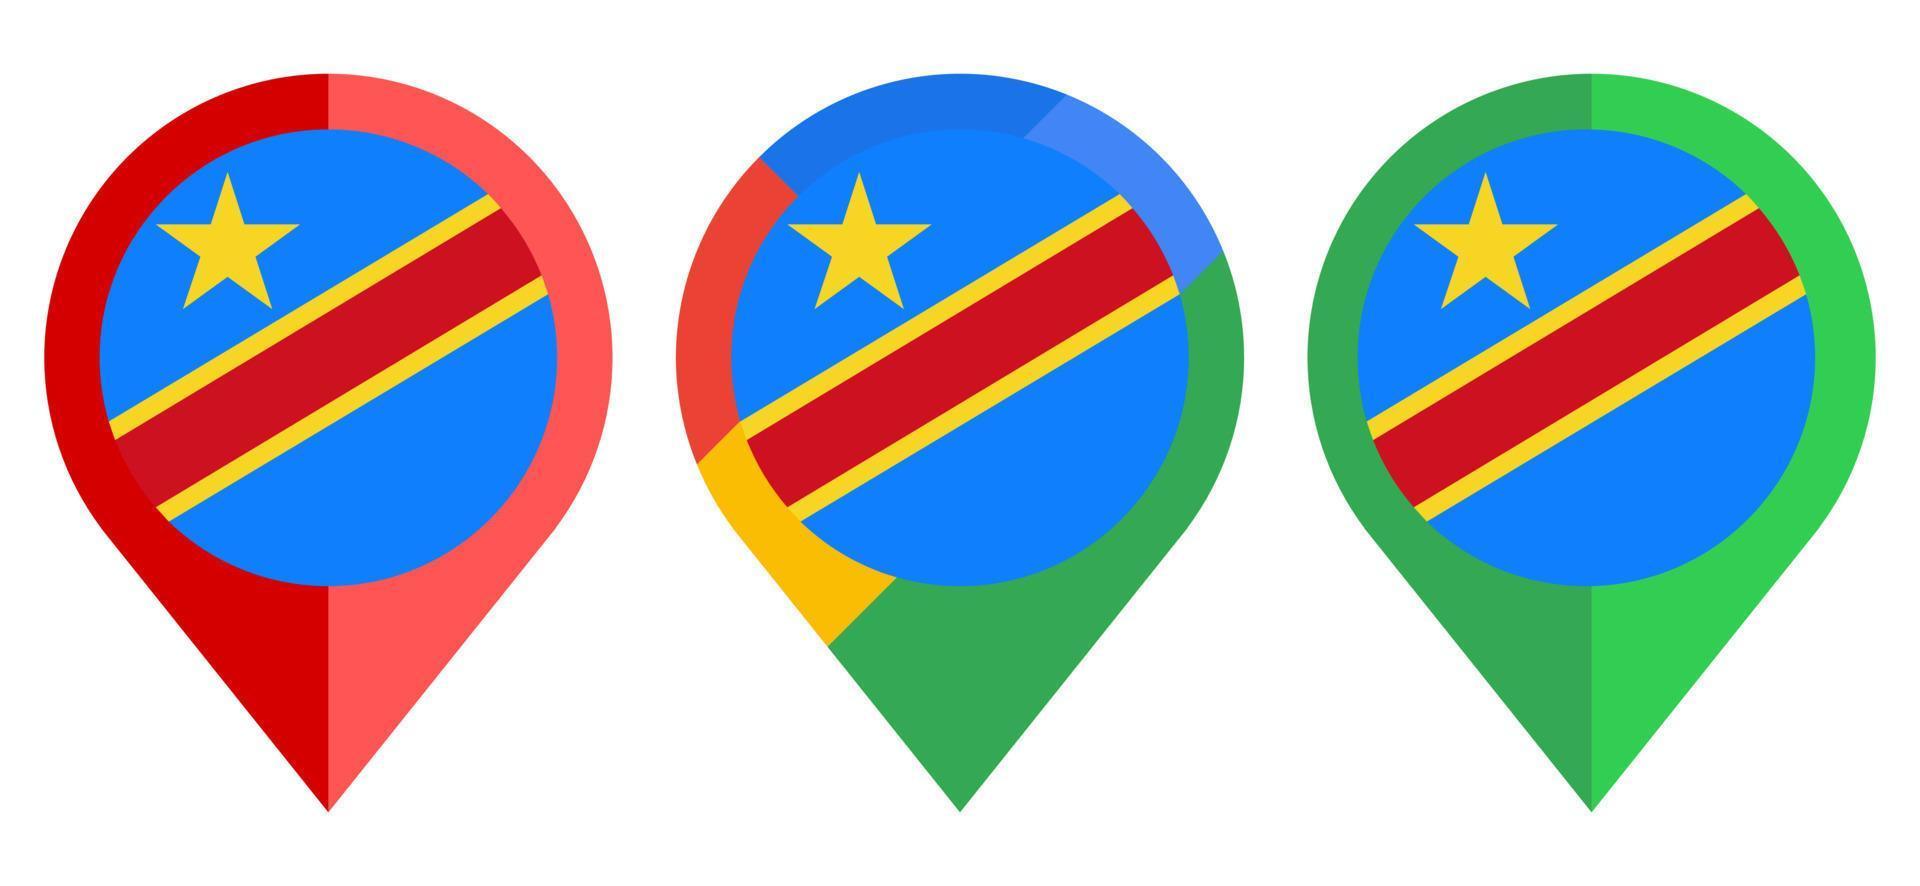 flat map marker icon with congo flag isolated on white background vector